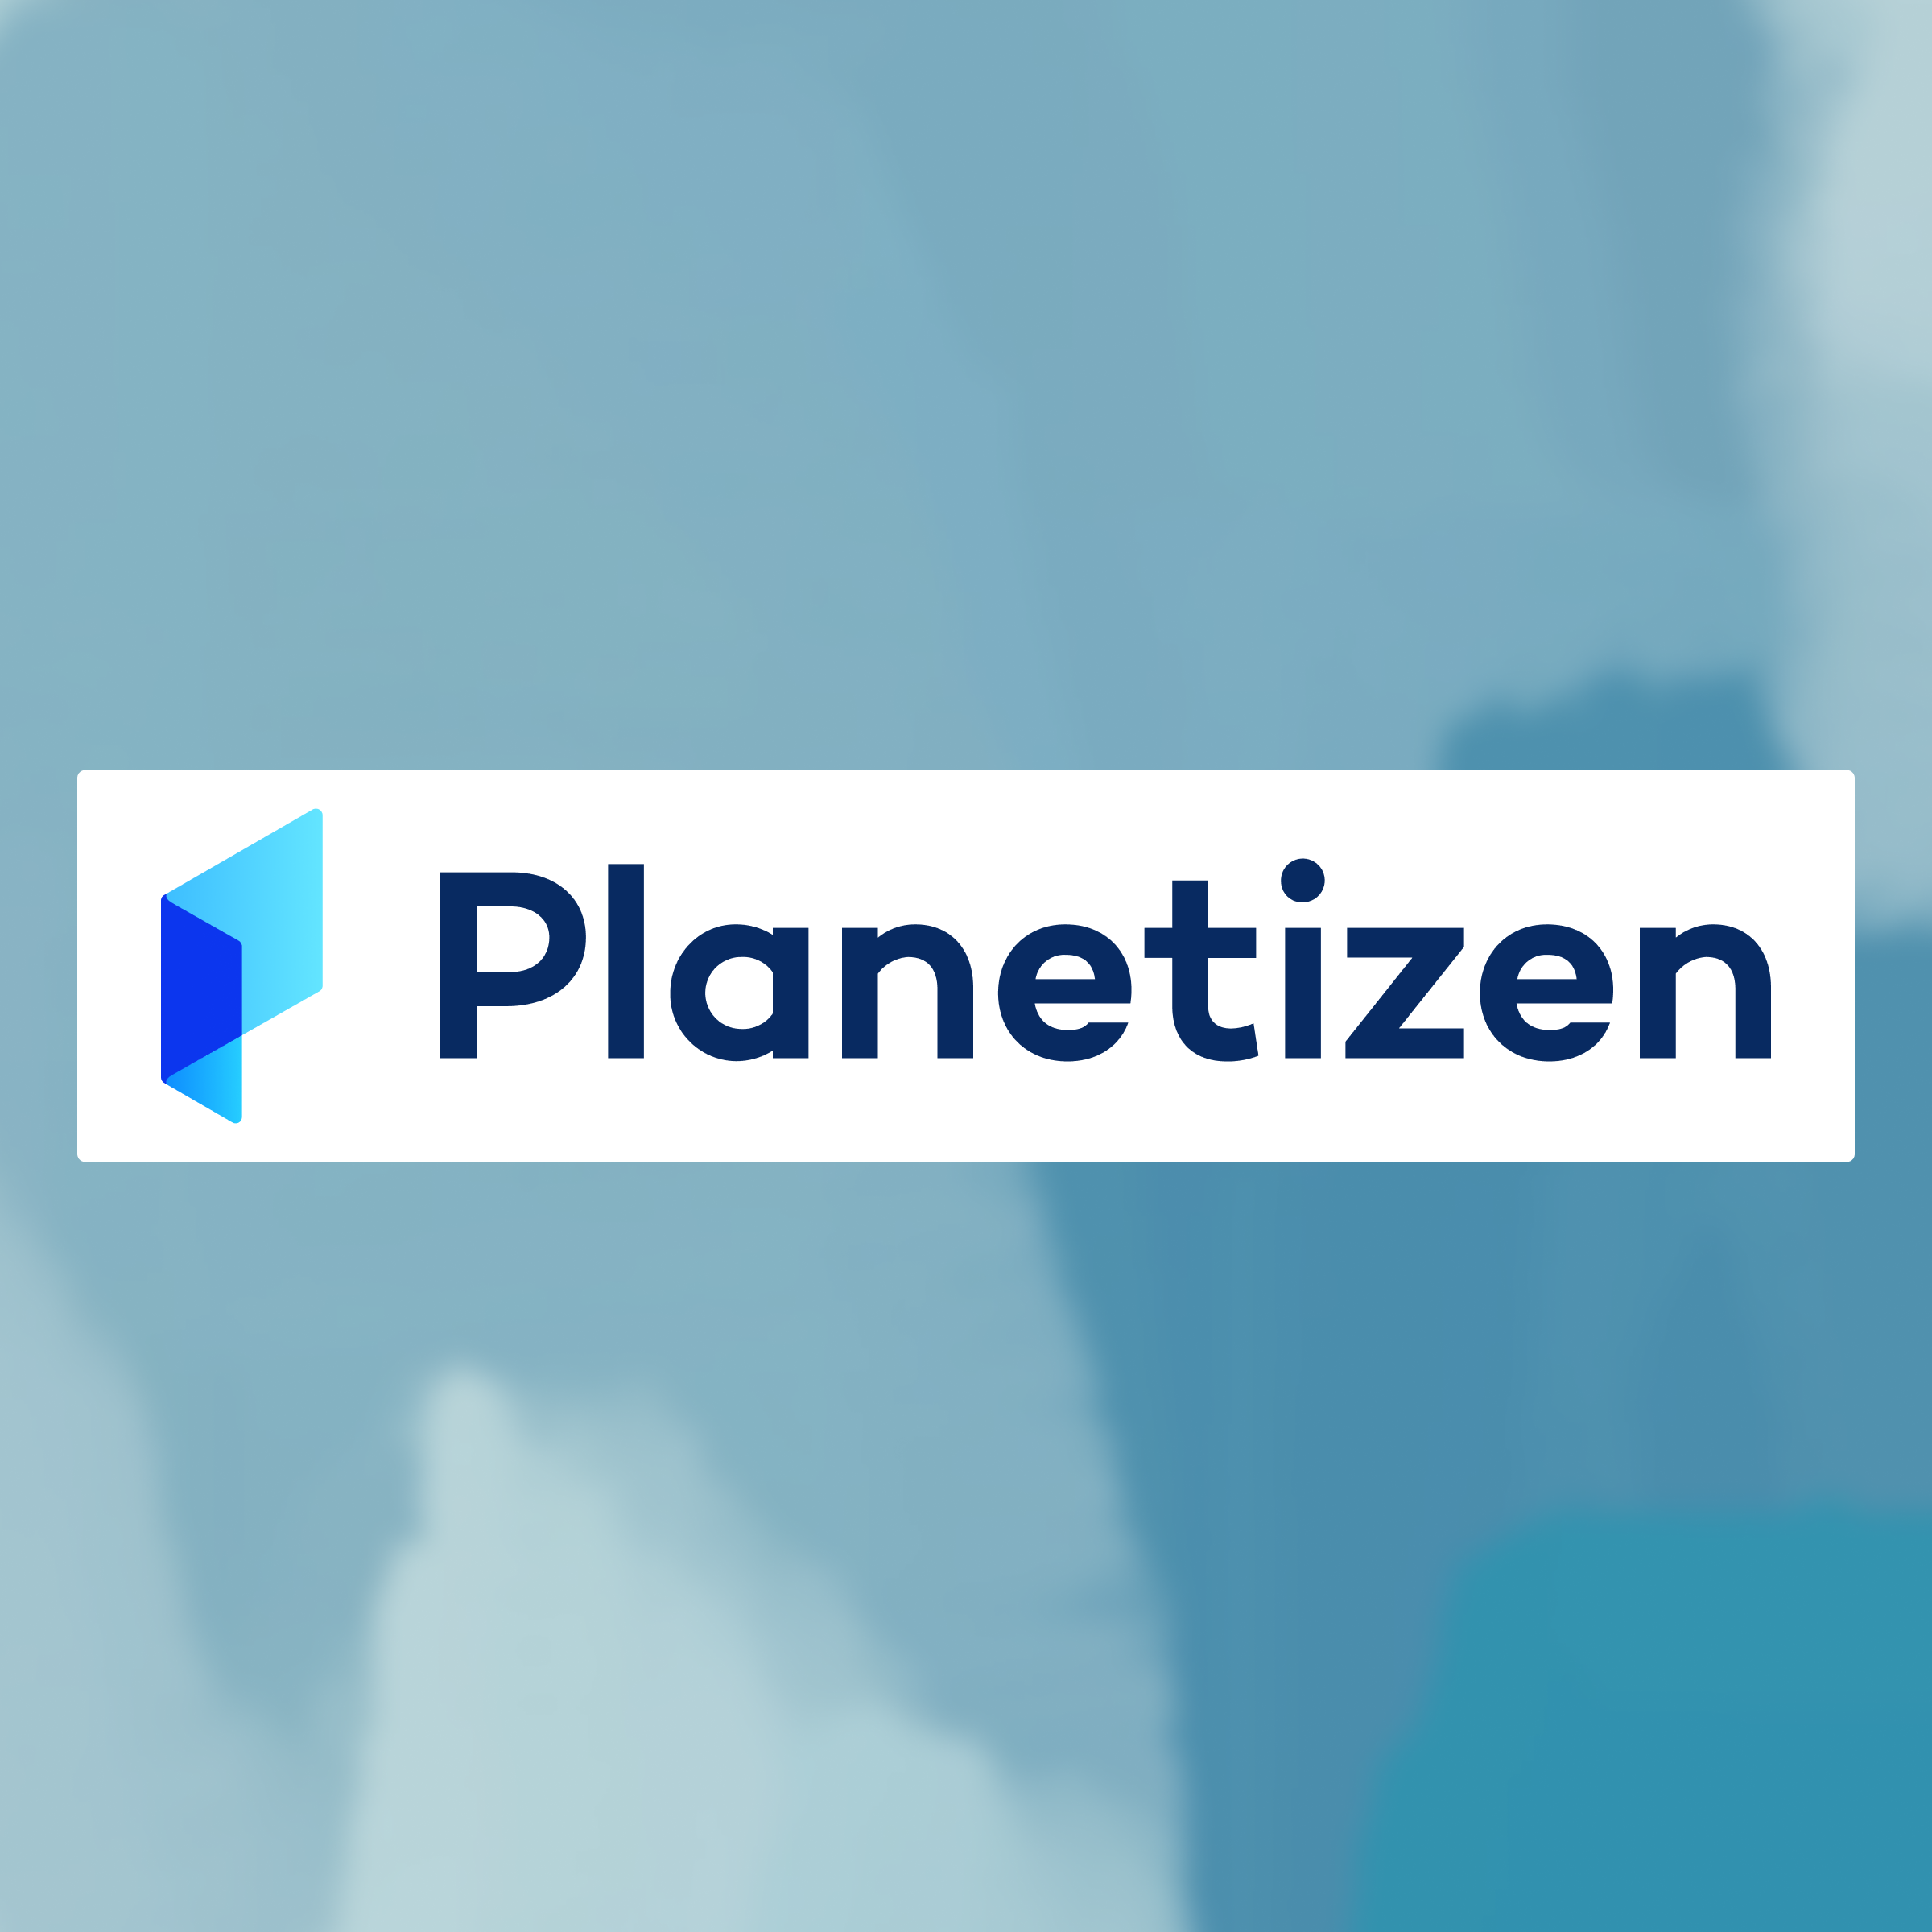 Logo of Planetizen against an abstract painted background